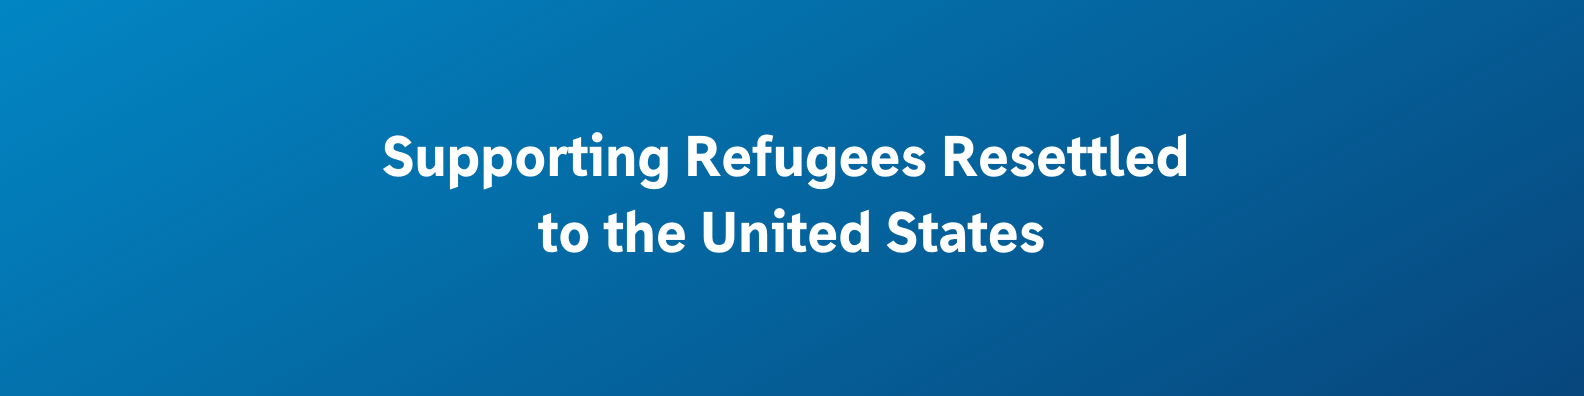 Supporting Refugees Resettled to the United States (1)